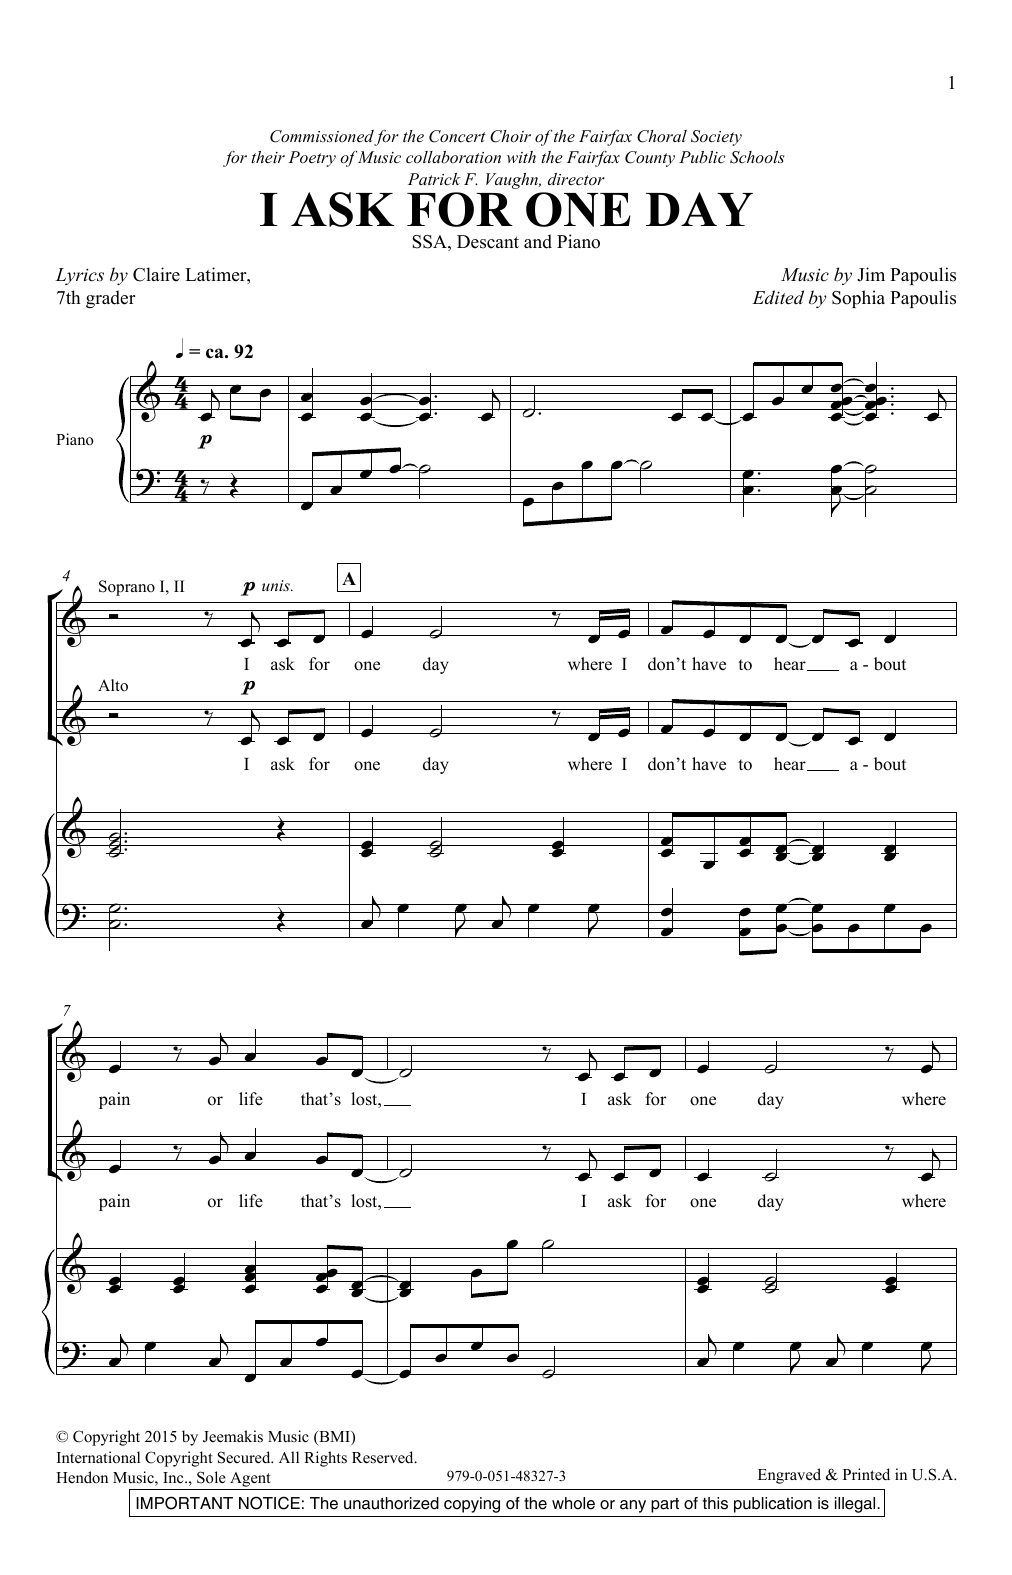 Download Jim Papoulis I Ask For One Day Sheet Music